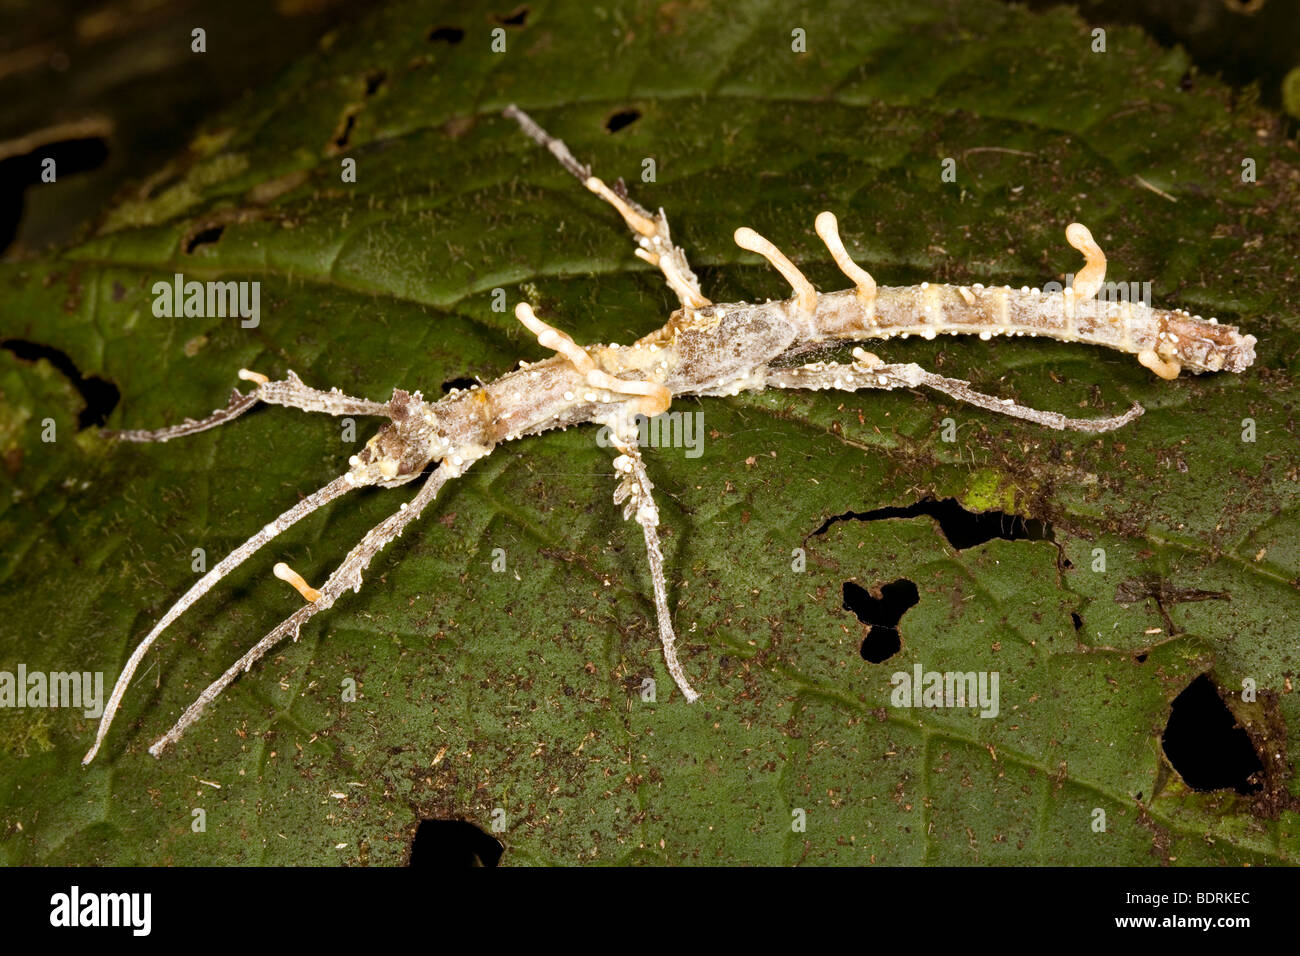 Stick insect parasitized by Cordiceps fungus Stock Photo